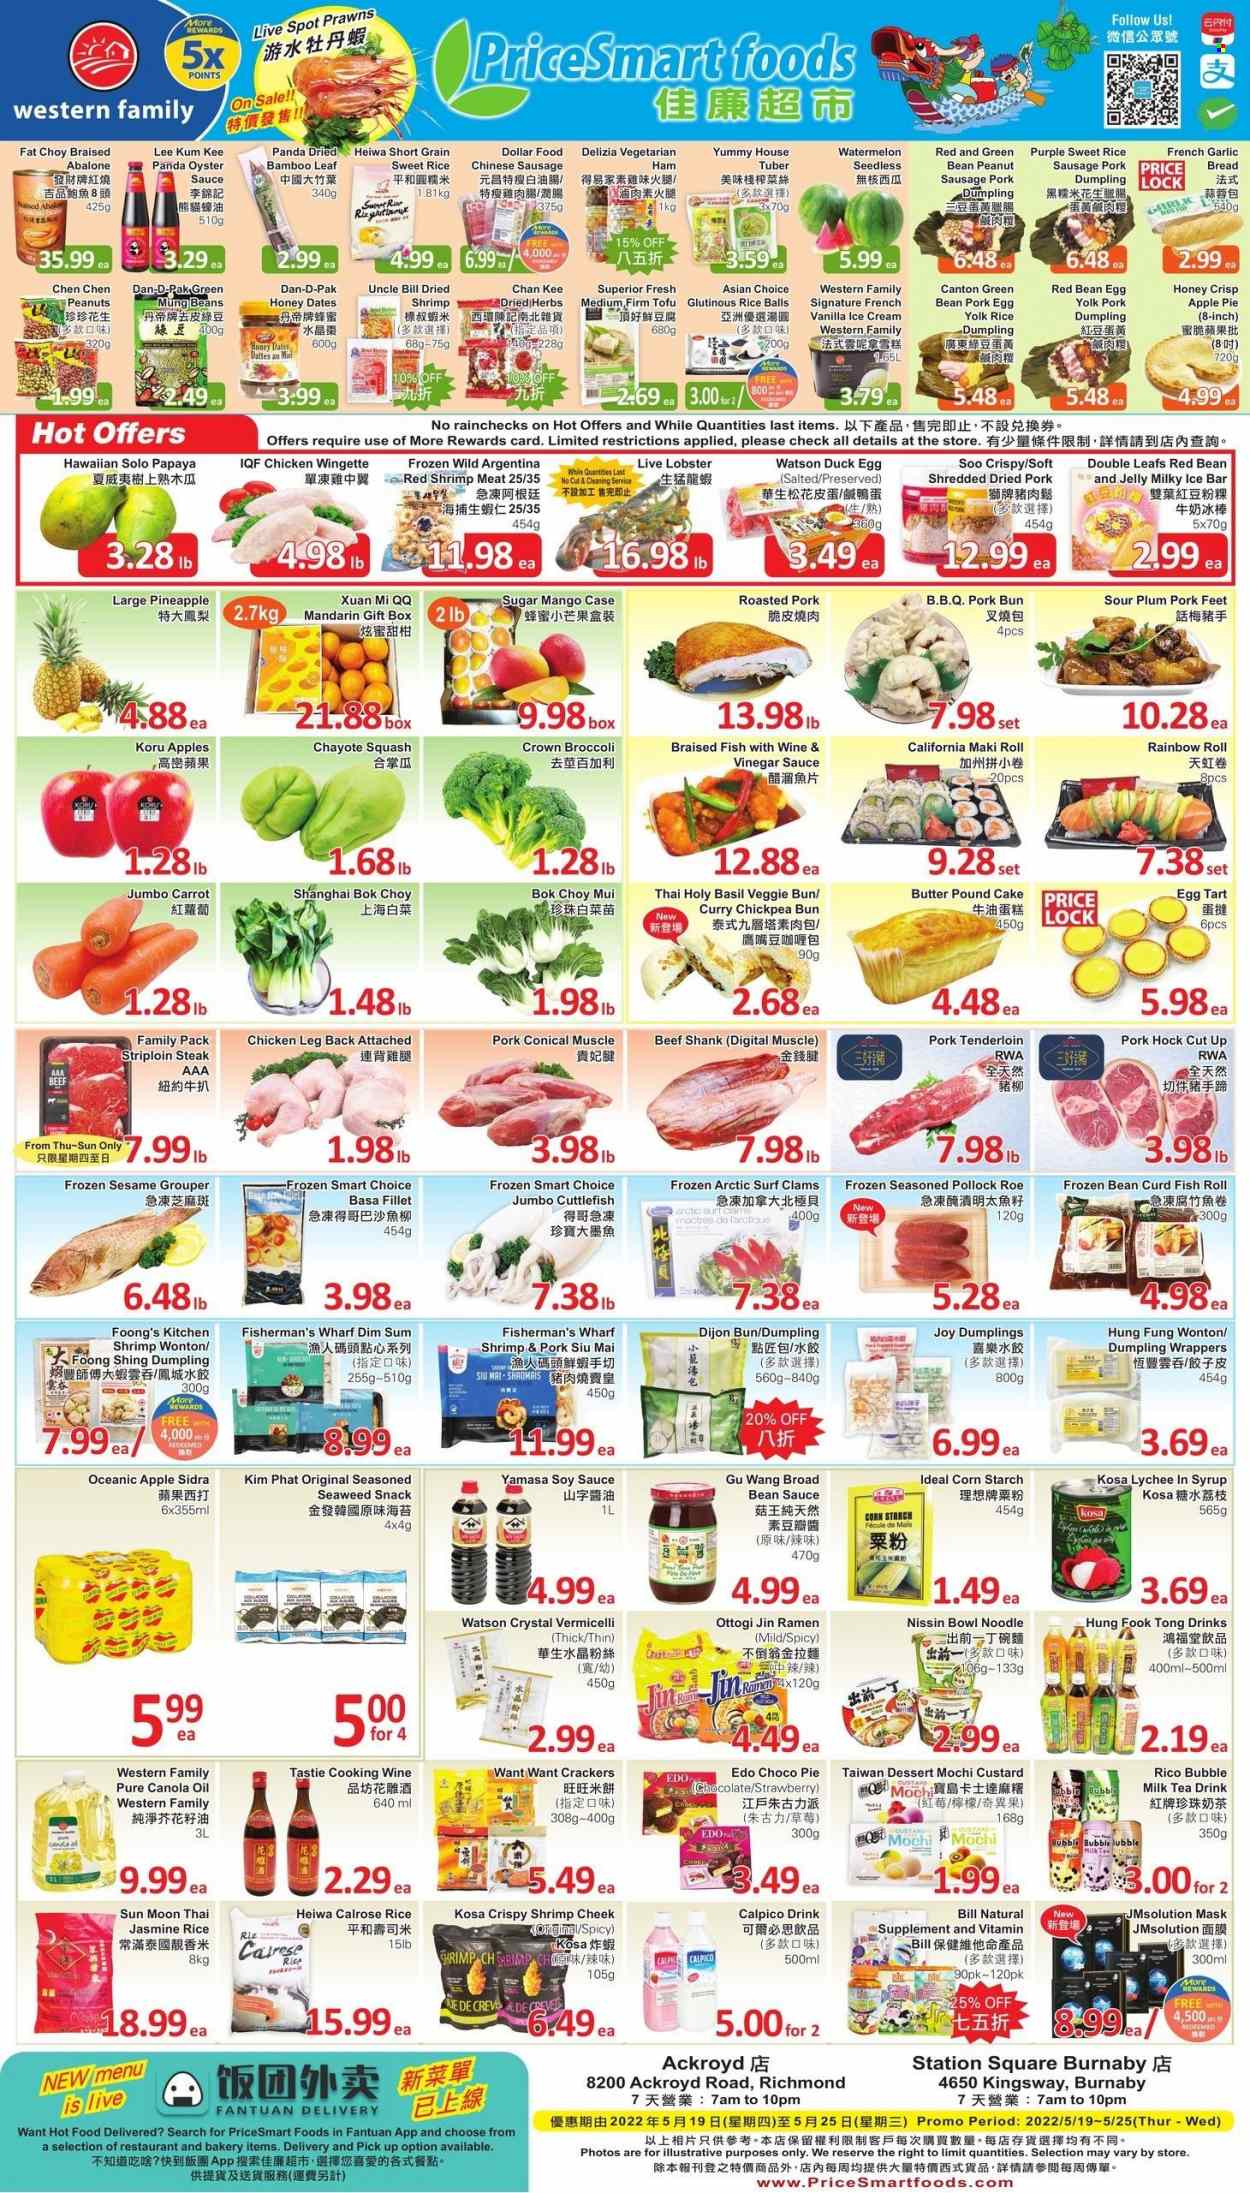 PriceSmart Foods flyer  - May 19, 2022 - May 25, 2022.